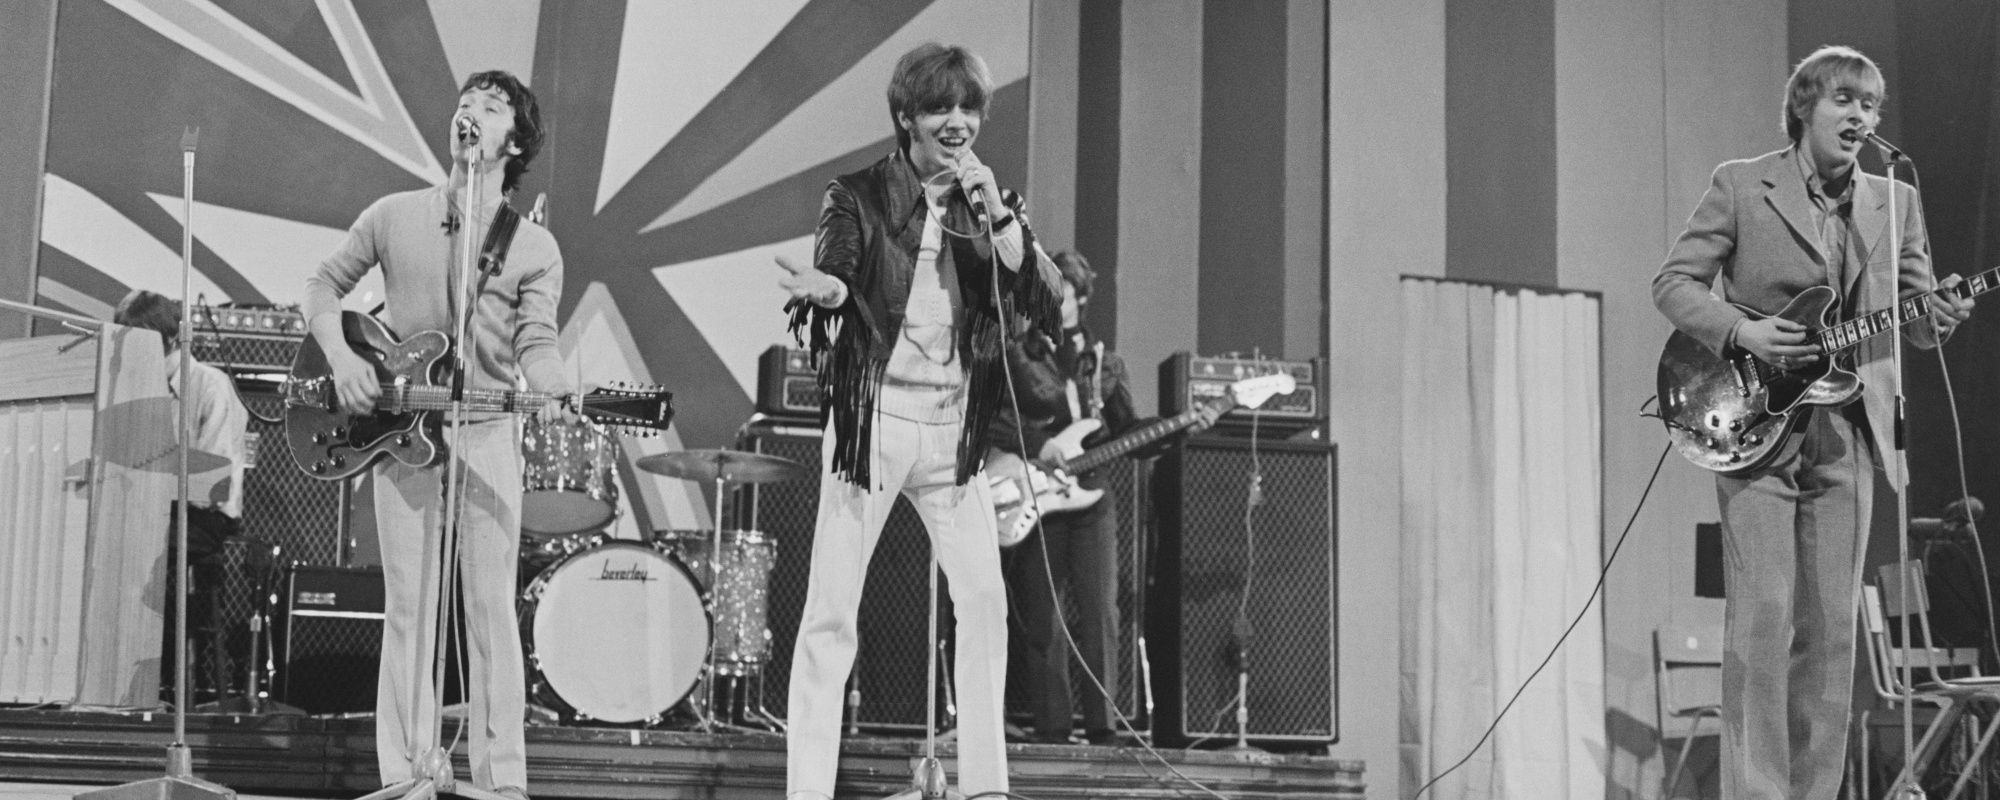 Thank God It’s Friday: The Story Behind “Friday on My Mind” by The Easybeats